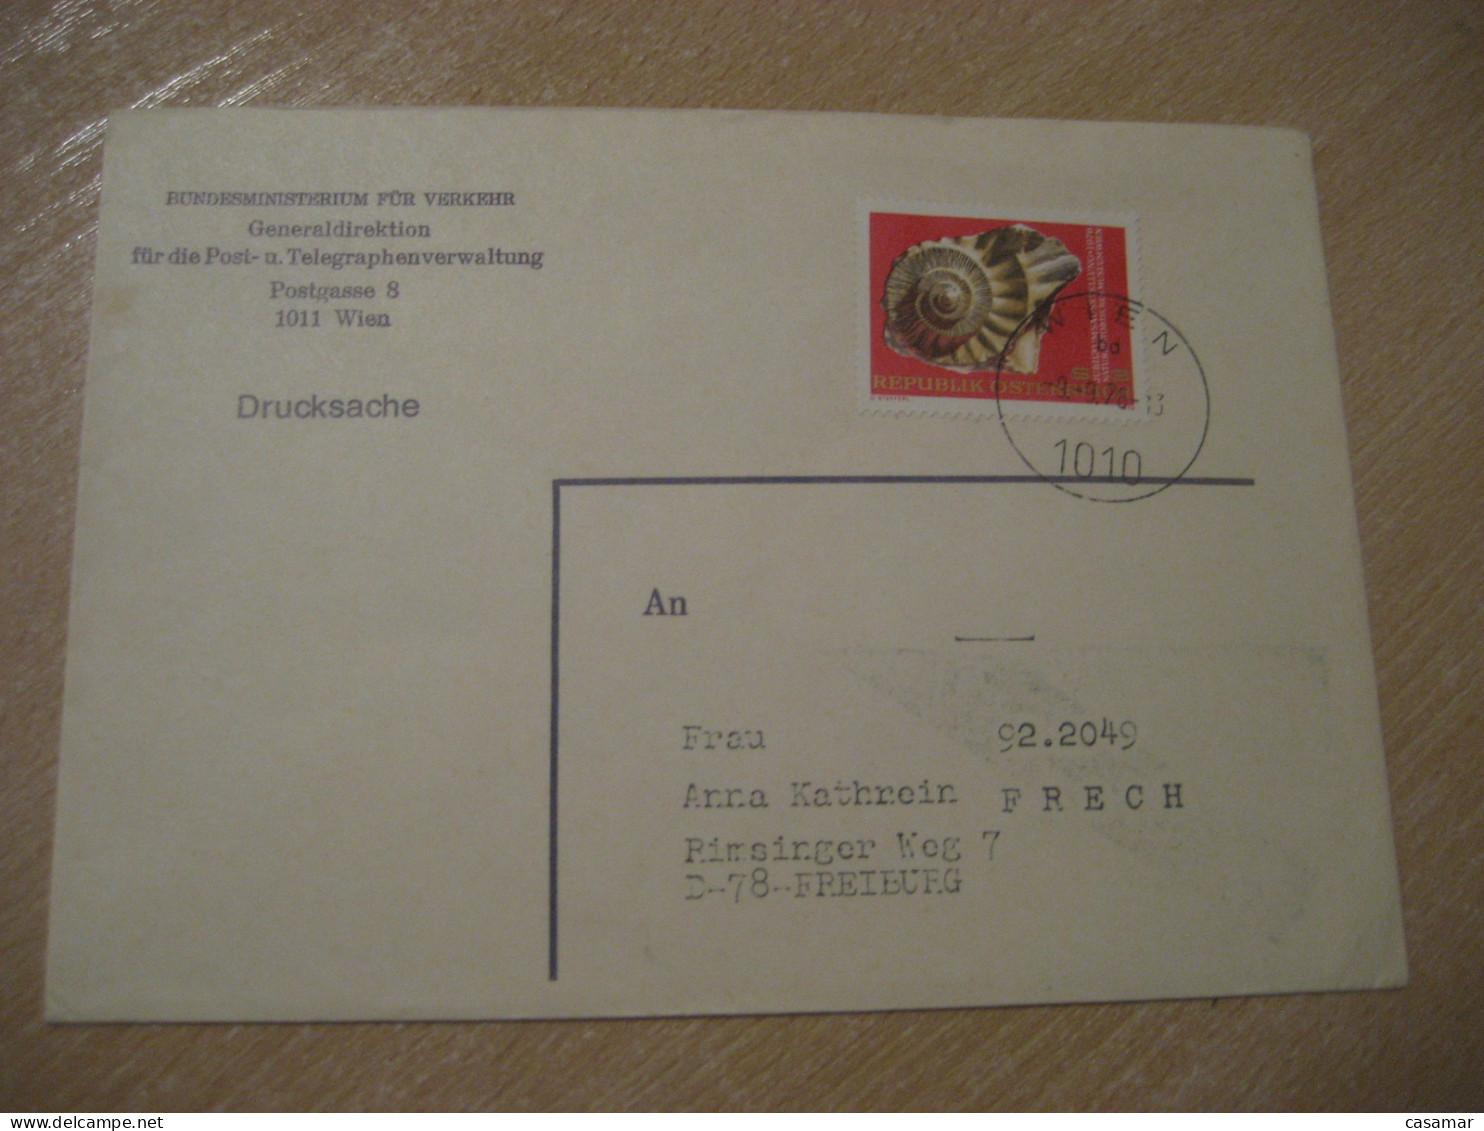 WIEN 1976 Freiburg Ammonite Mollusc Natural History Museum Cancel Cover AUSTRIA Fossil Fossils Animals Fossiles Geology - Fossils